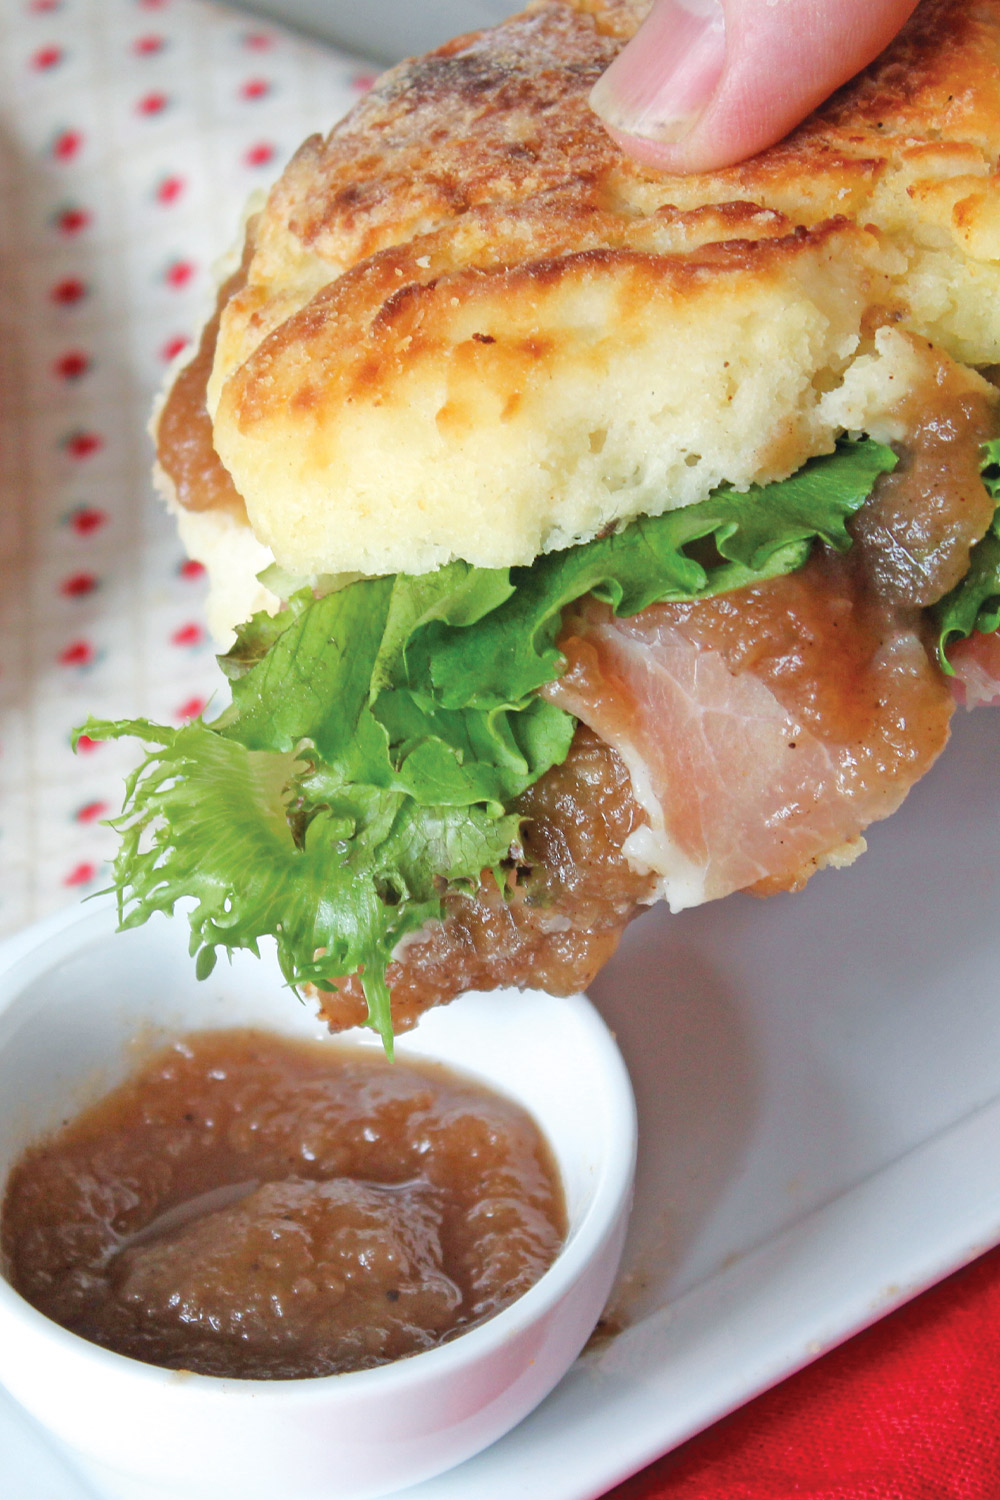 Southern biscuits with ham and apple butter are a party classic. Grab one now!